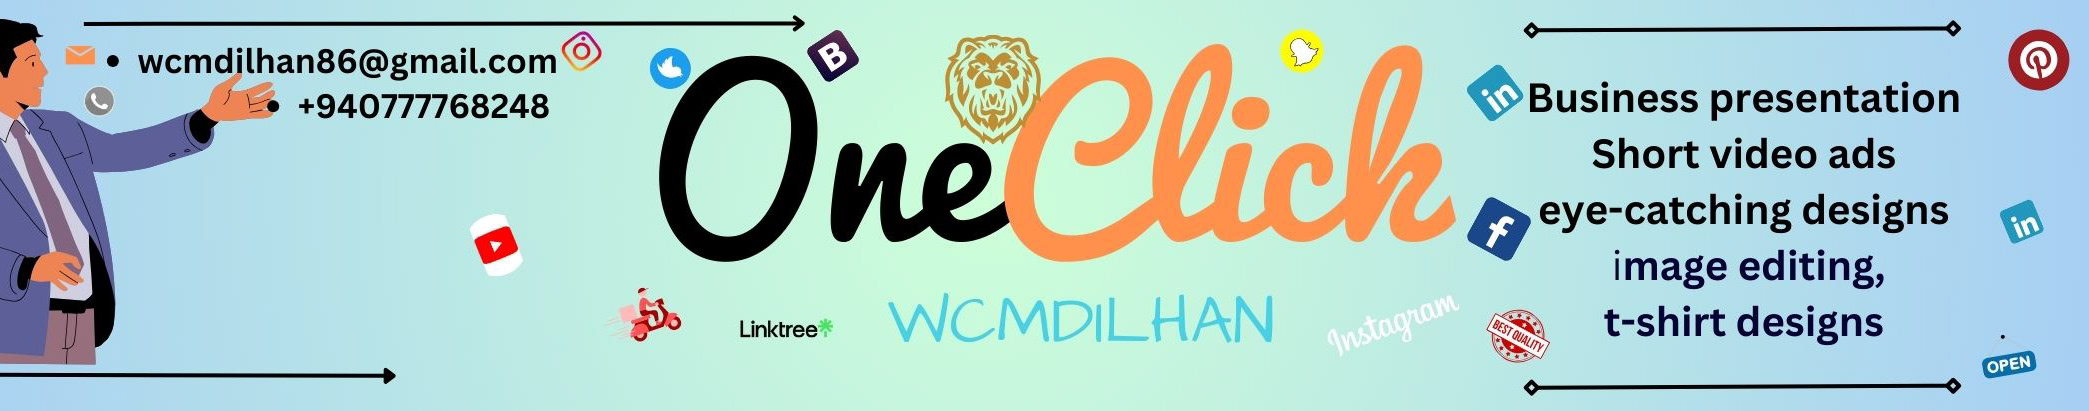 Oneclick Wcmdilhan's profile banner